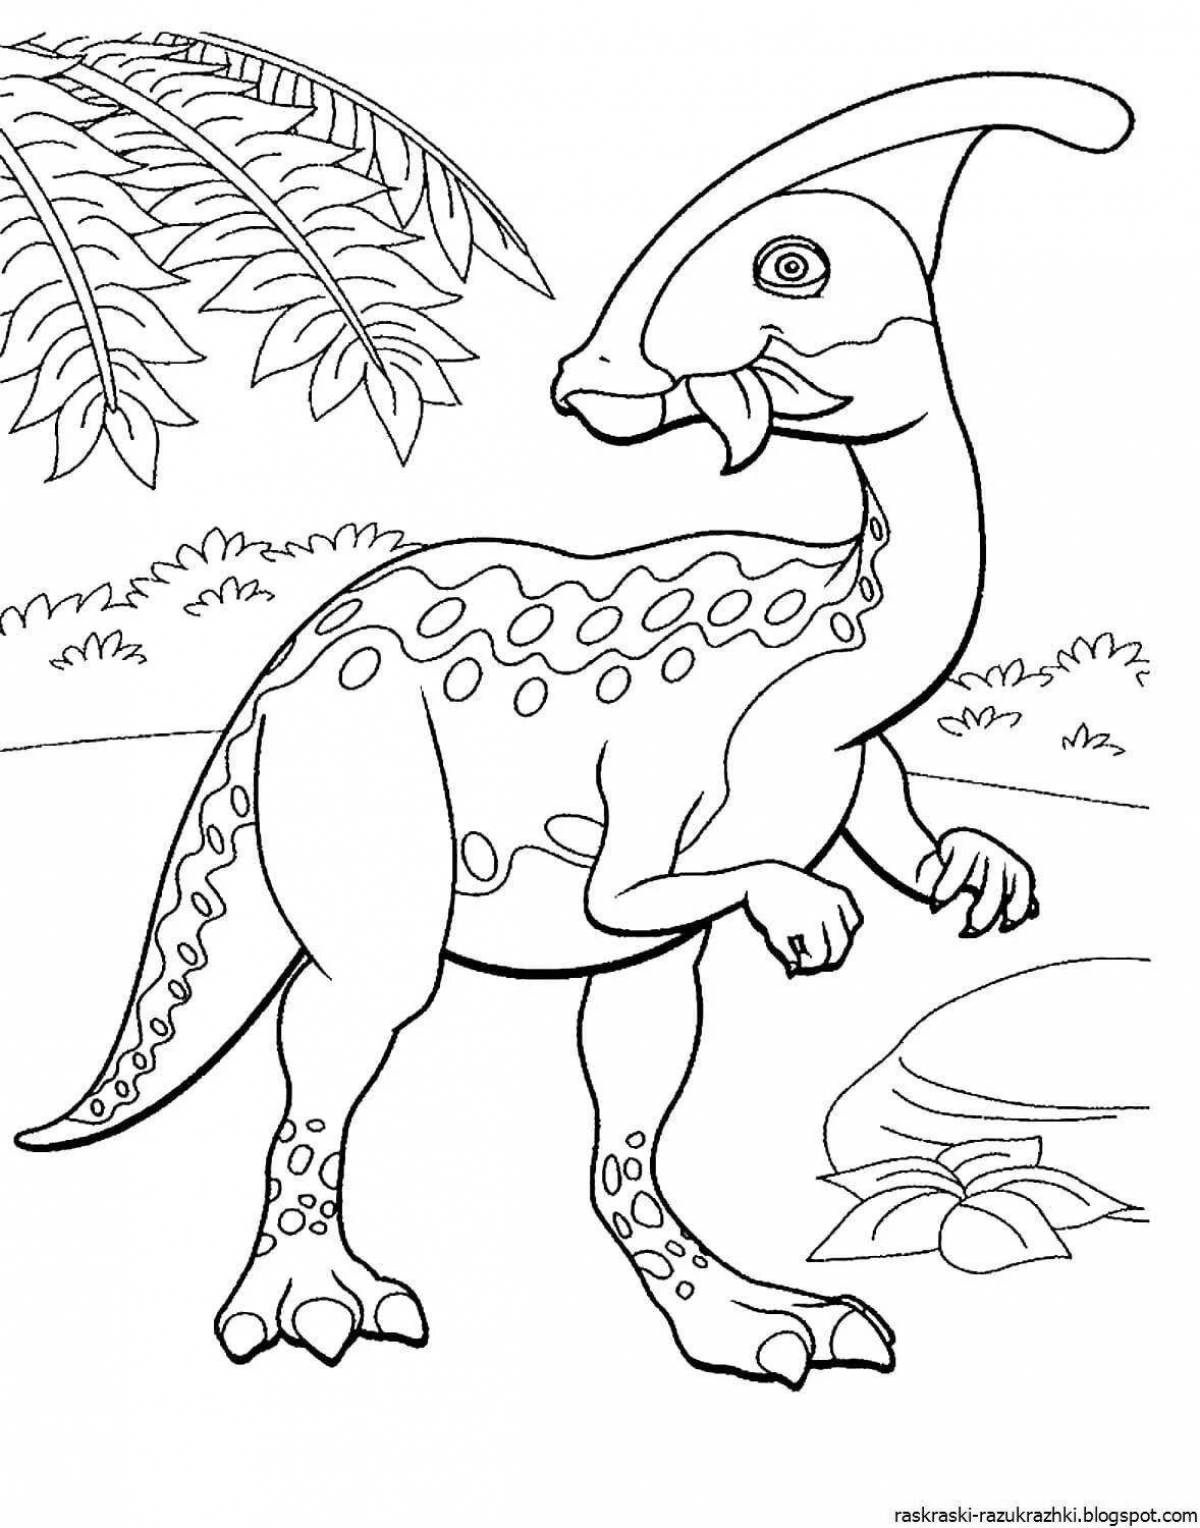 Colorful drawings of dinosaurs for coloring